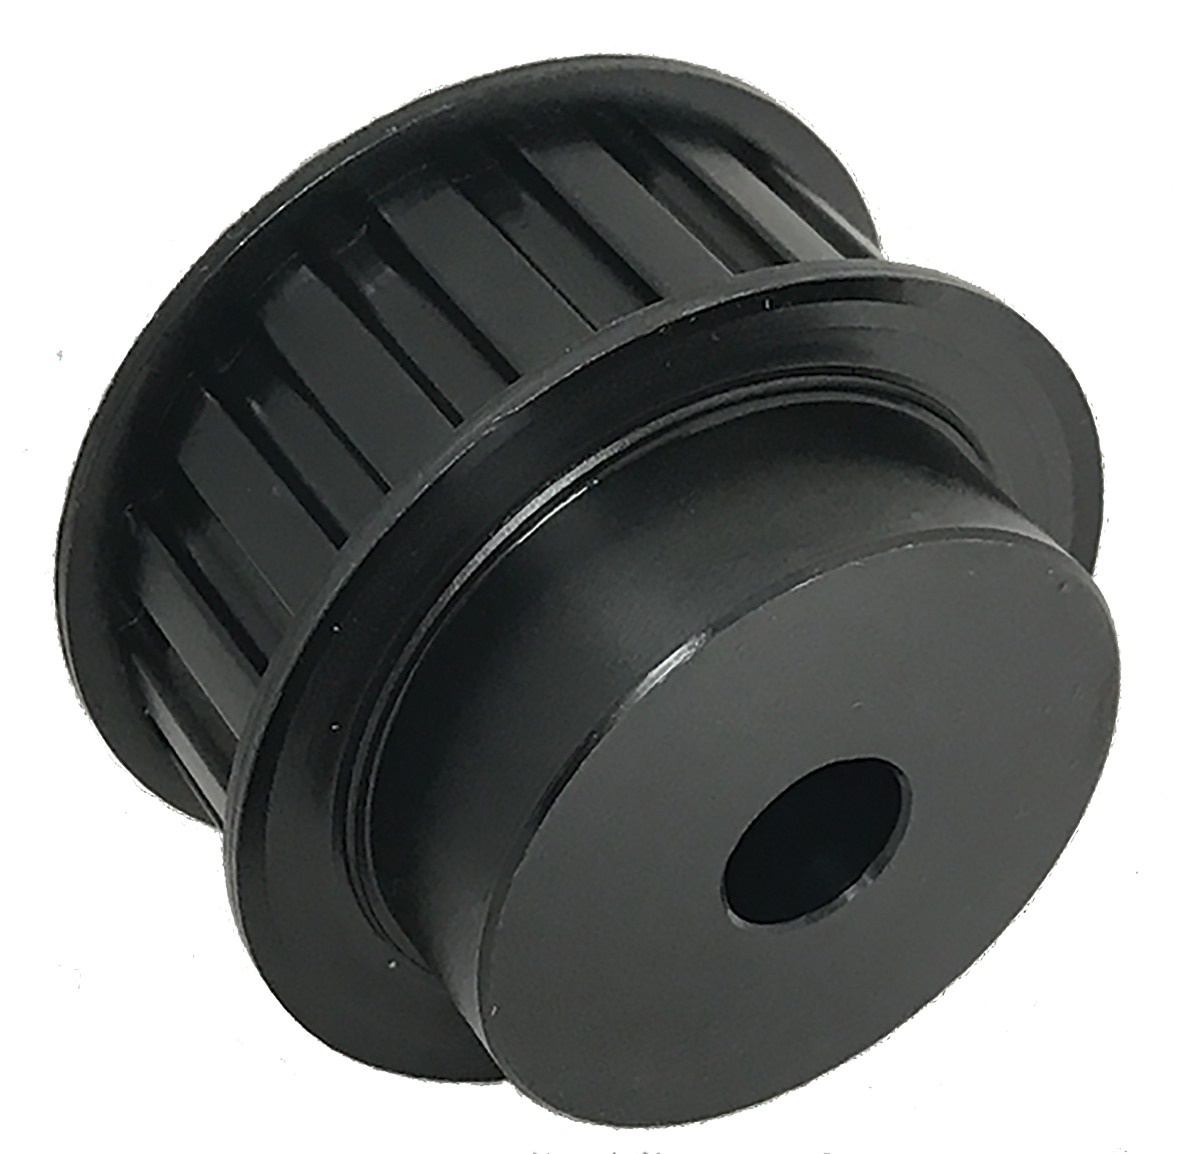 19H100-6FS7 - Steel Imperial Pitch Pulleys